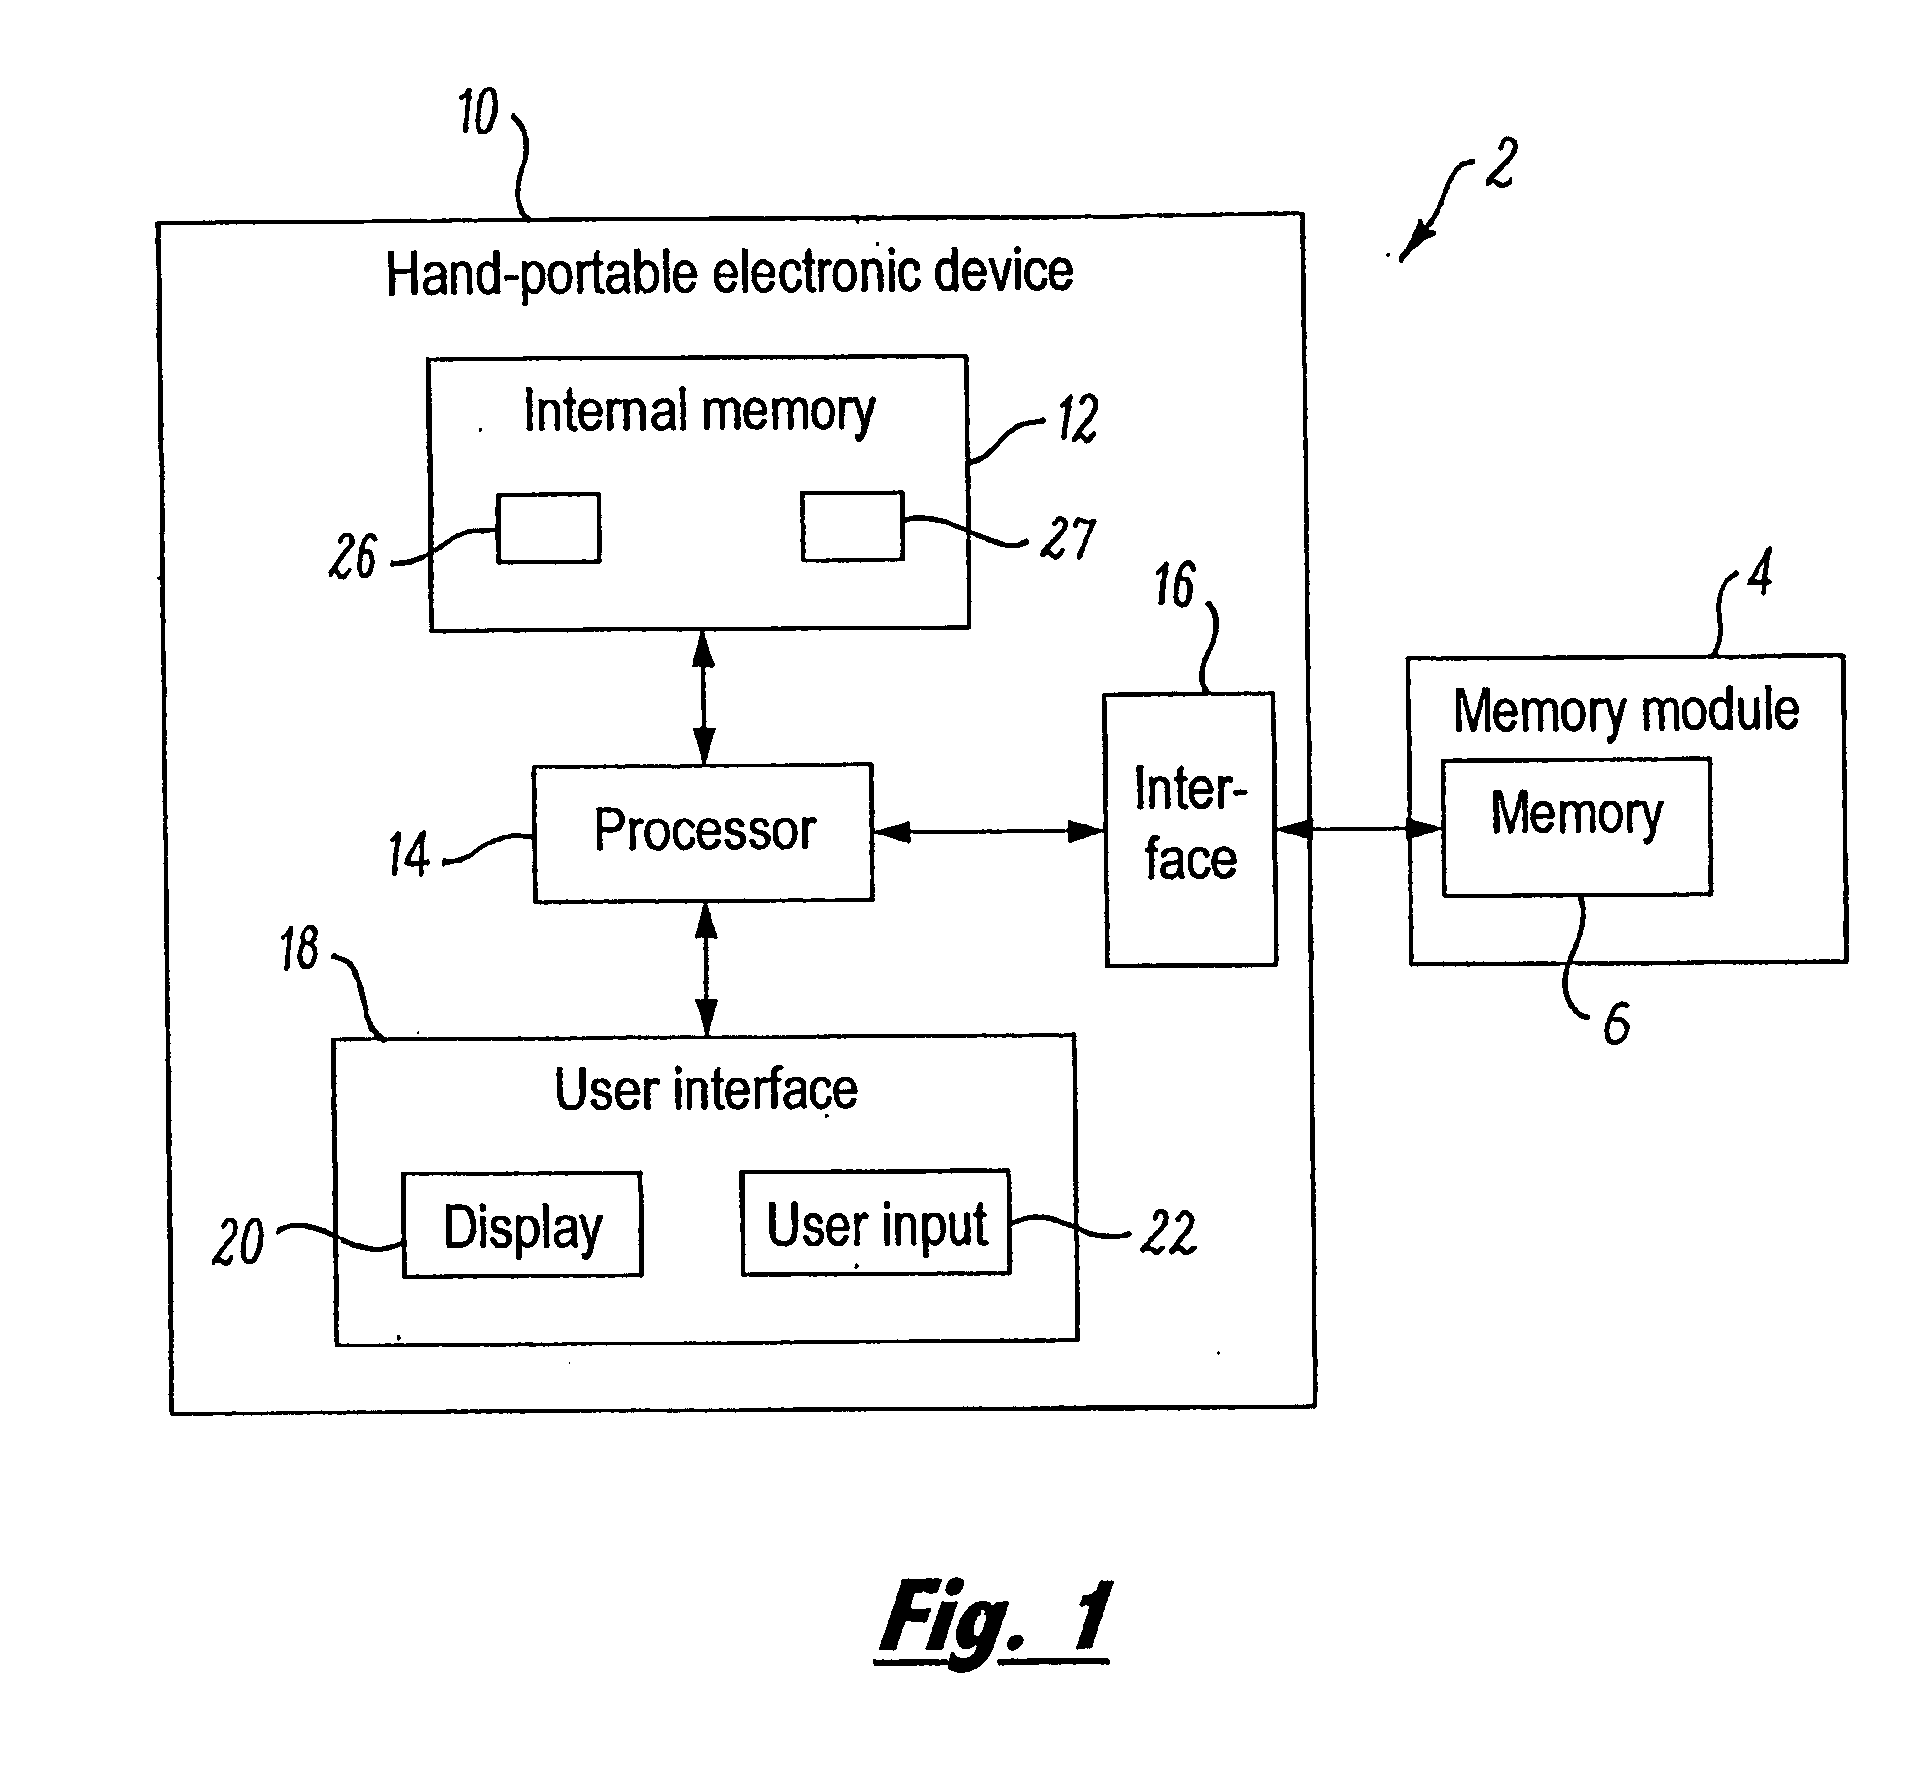 Hardware-Initiated Automated Back-Up of Data from an Internal Memory of a Hand-Portable Electronic Device